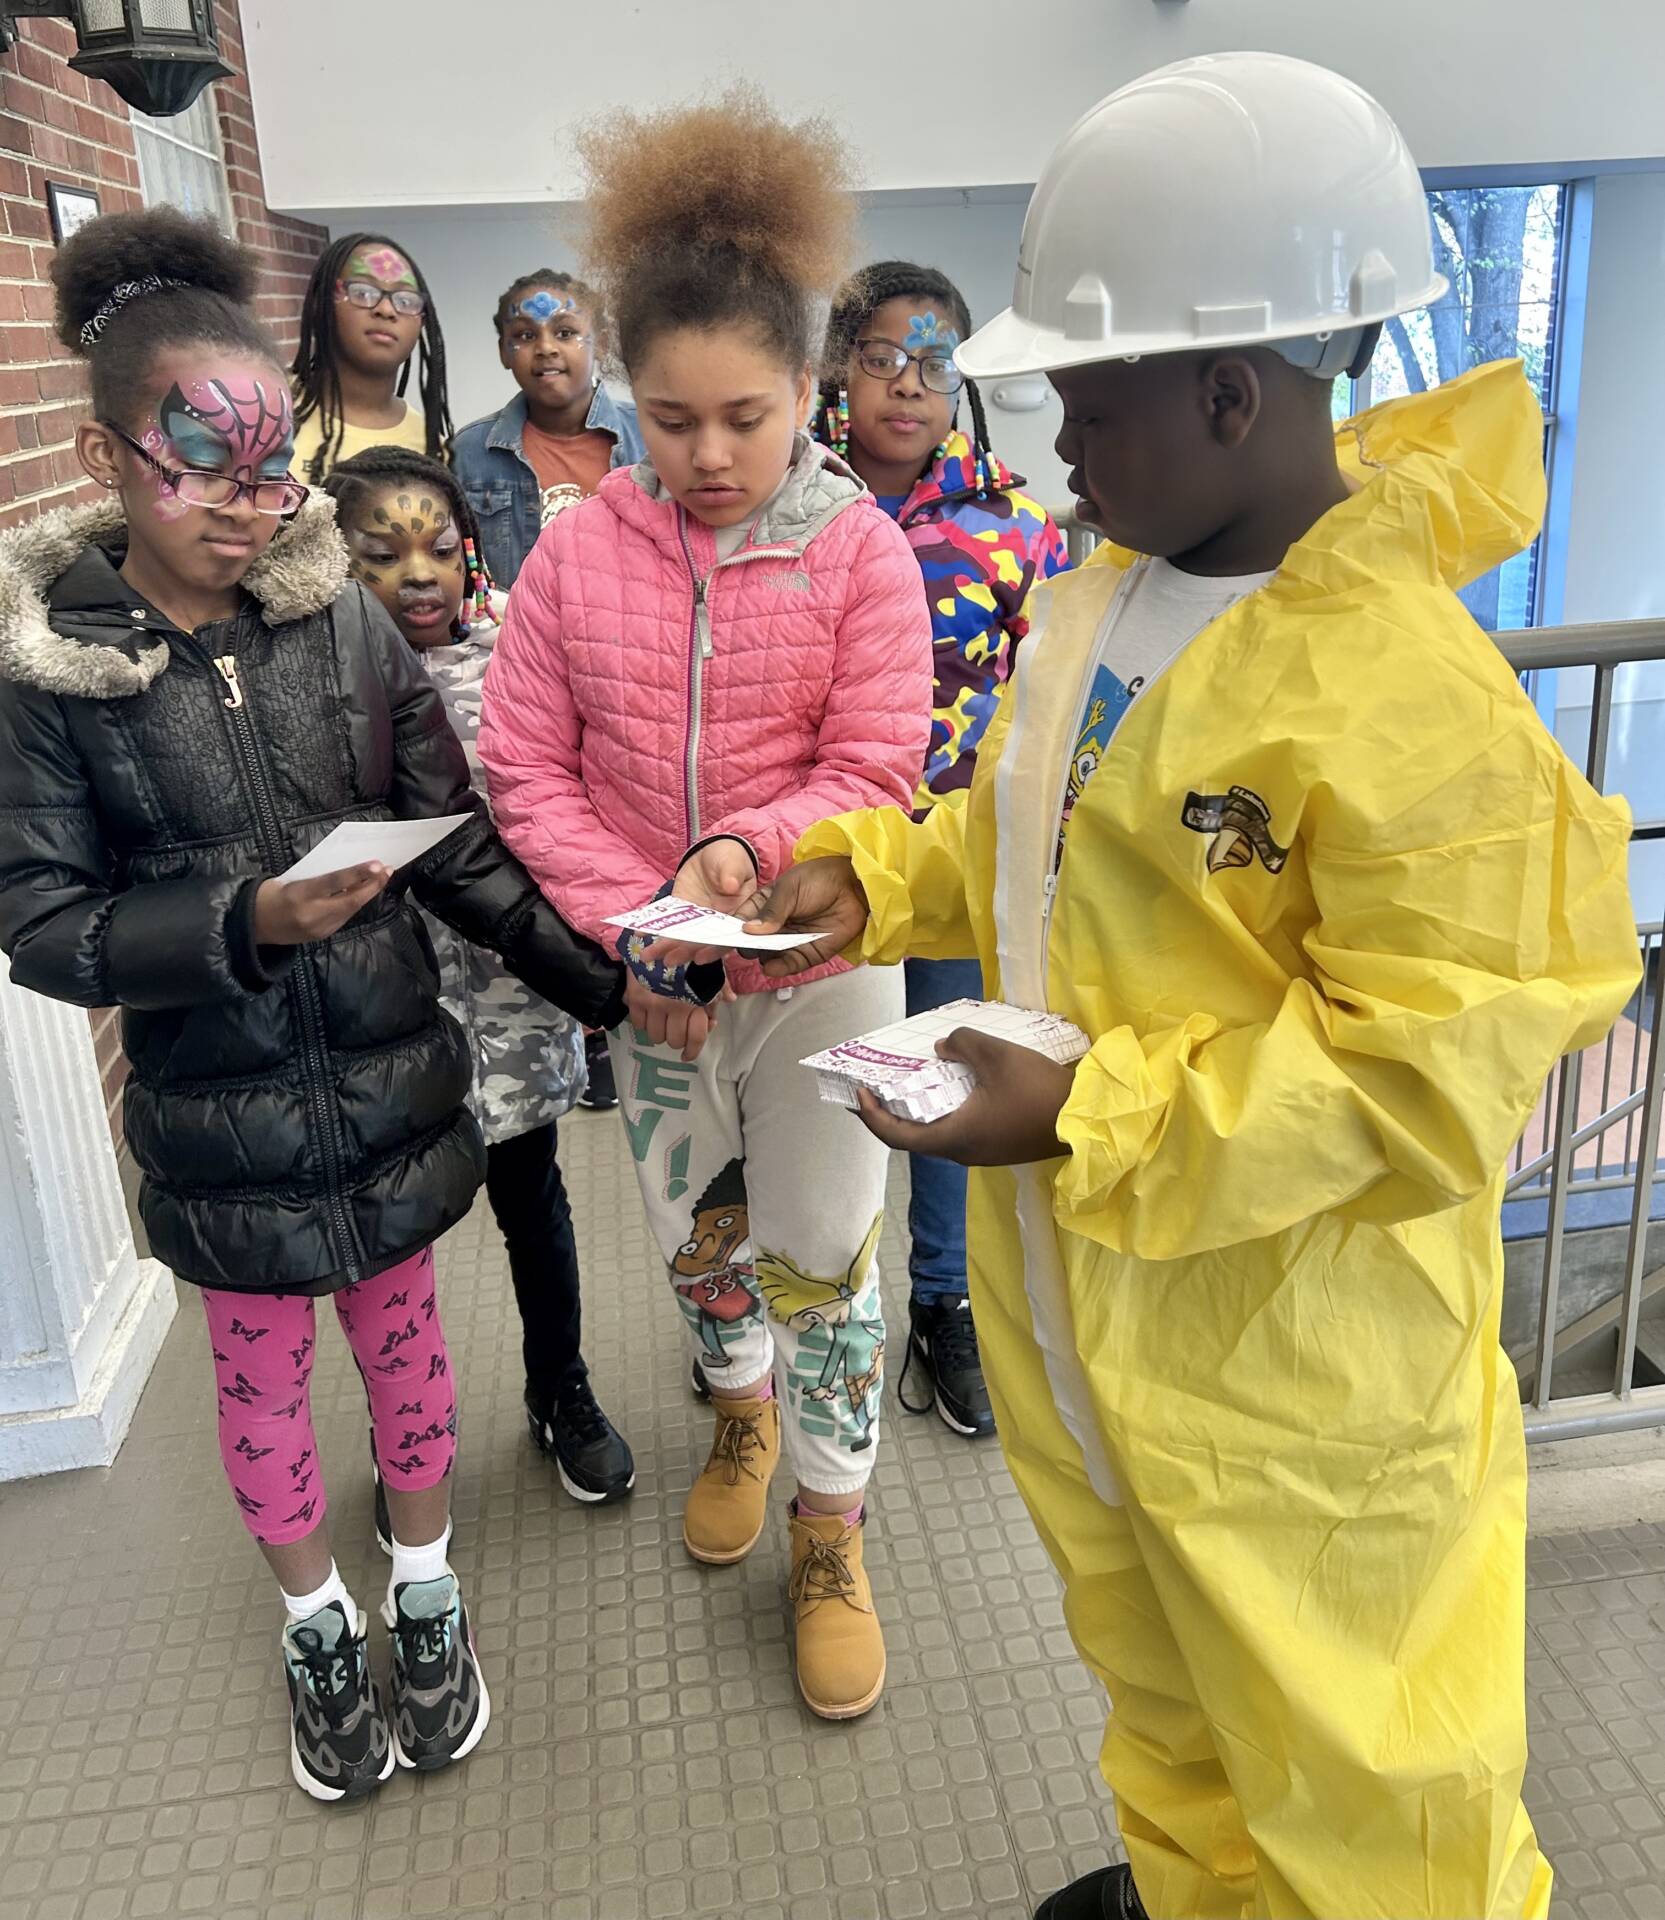 Man in a hazmat suit showing students around a power plant